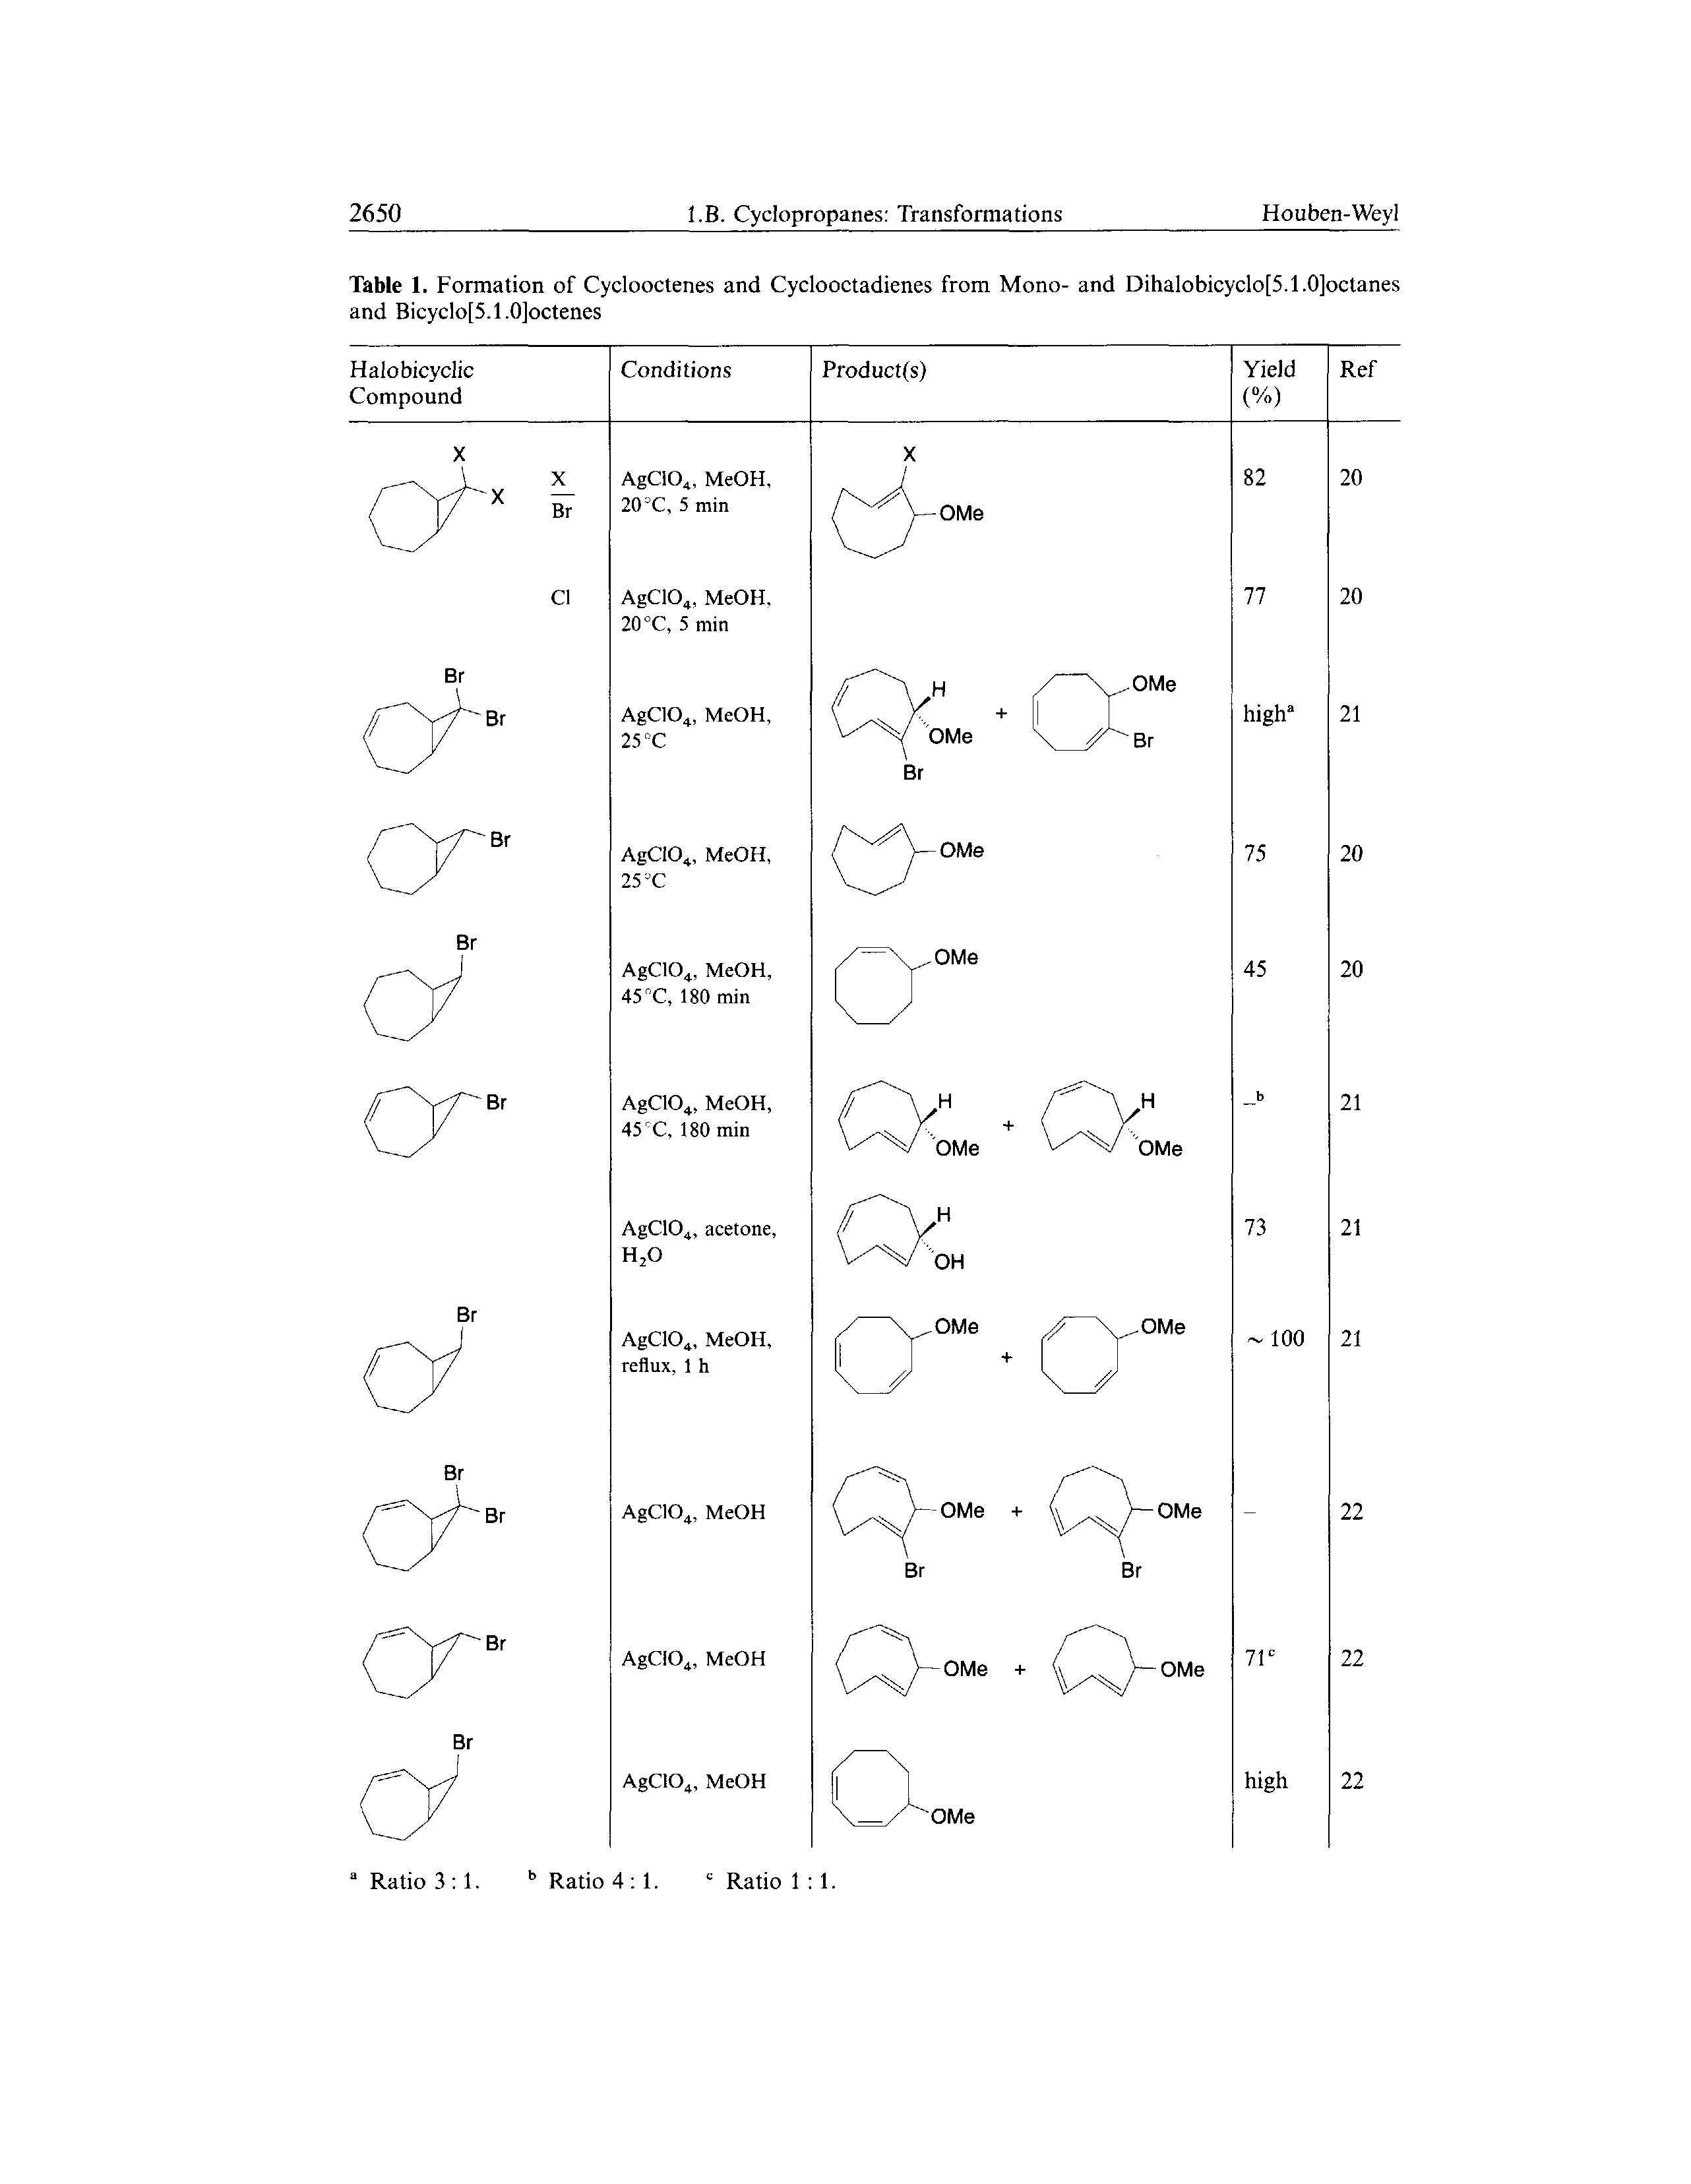 Table 1. Formation of Cyclooctenes and Cyclooctadienes from Mono- and Dihalobicyclo[5.1.0]octanes and Bicyclo[5.1.0]octenes...